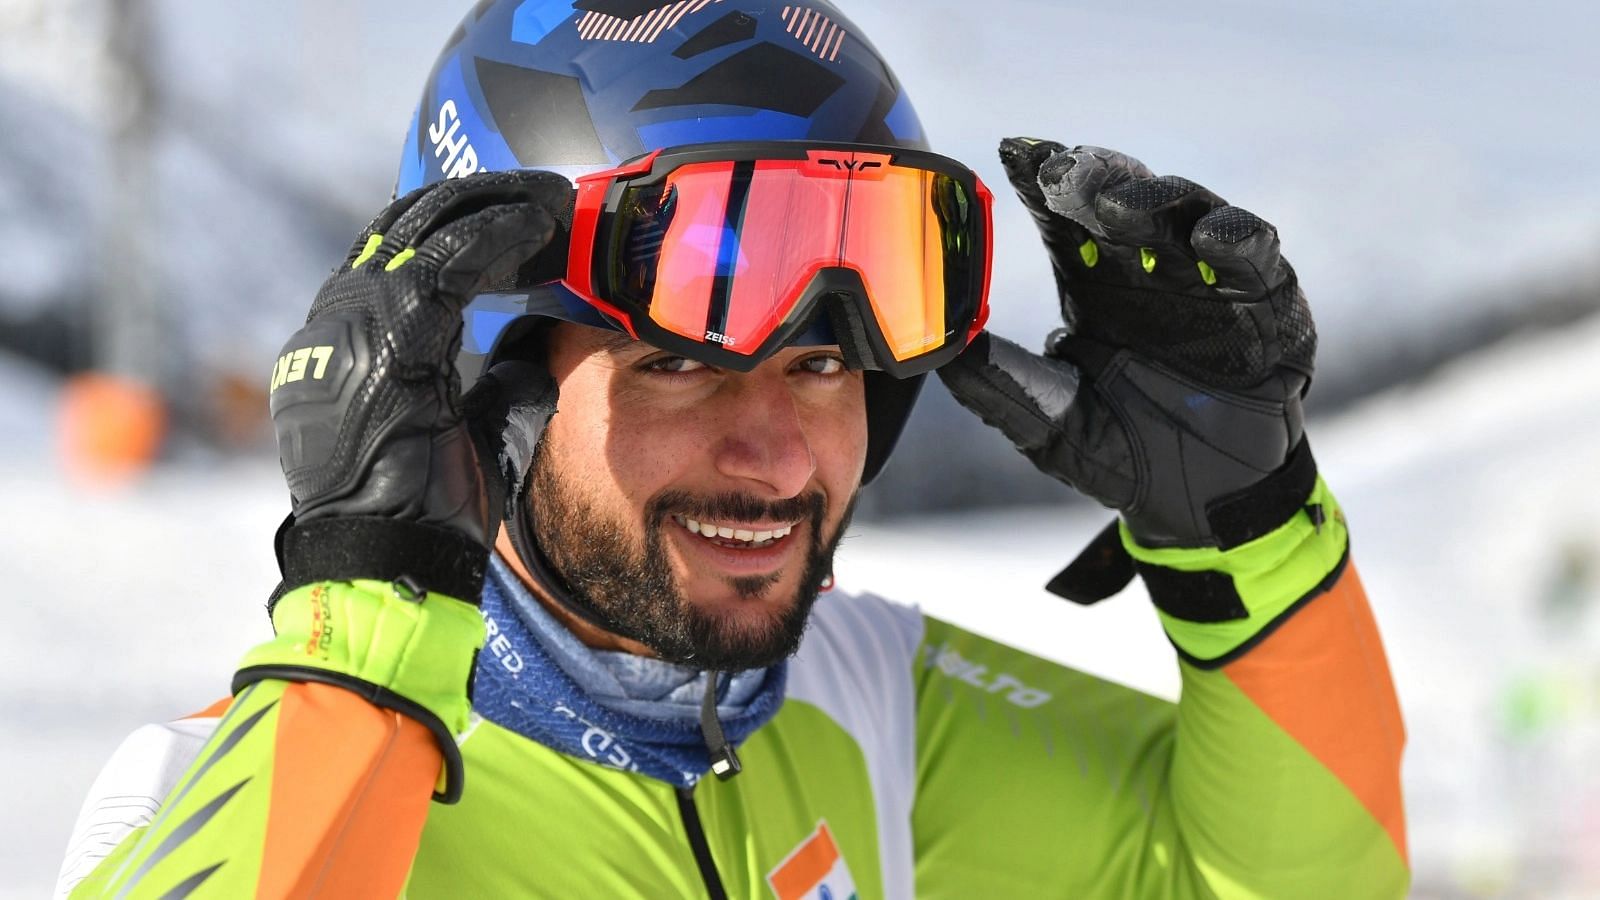 <div class="paragraphs"><p>Arif Khan has qualified for the&nbsp;Slalom and Giant Slalom skiing events at the 2022 Winter Olympics.</p></div>